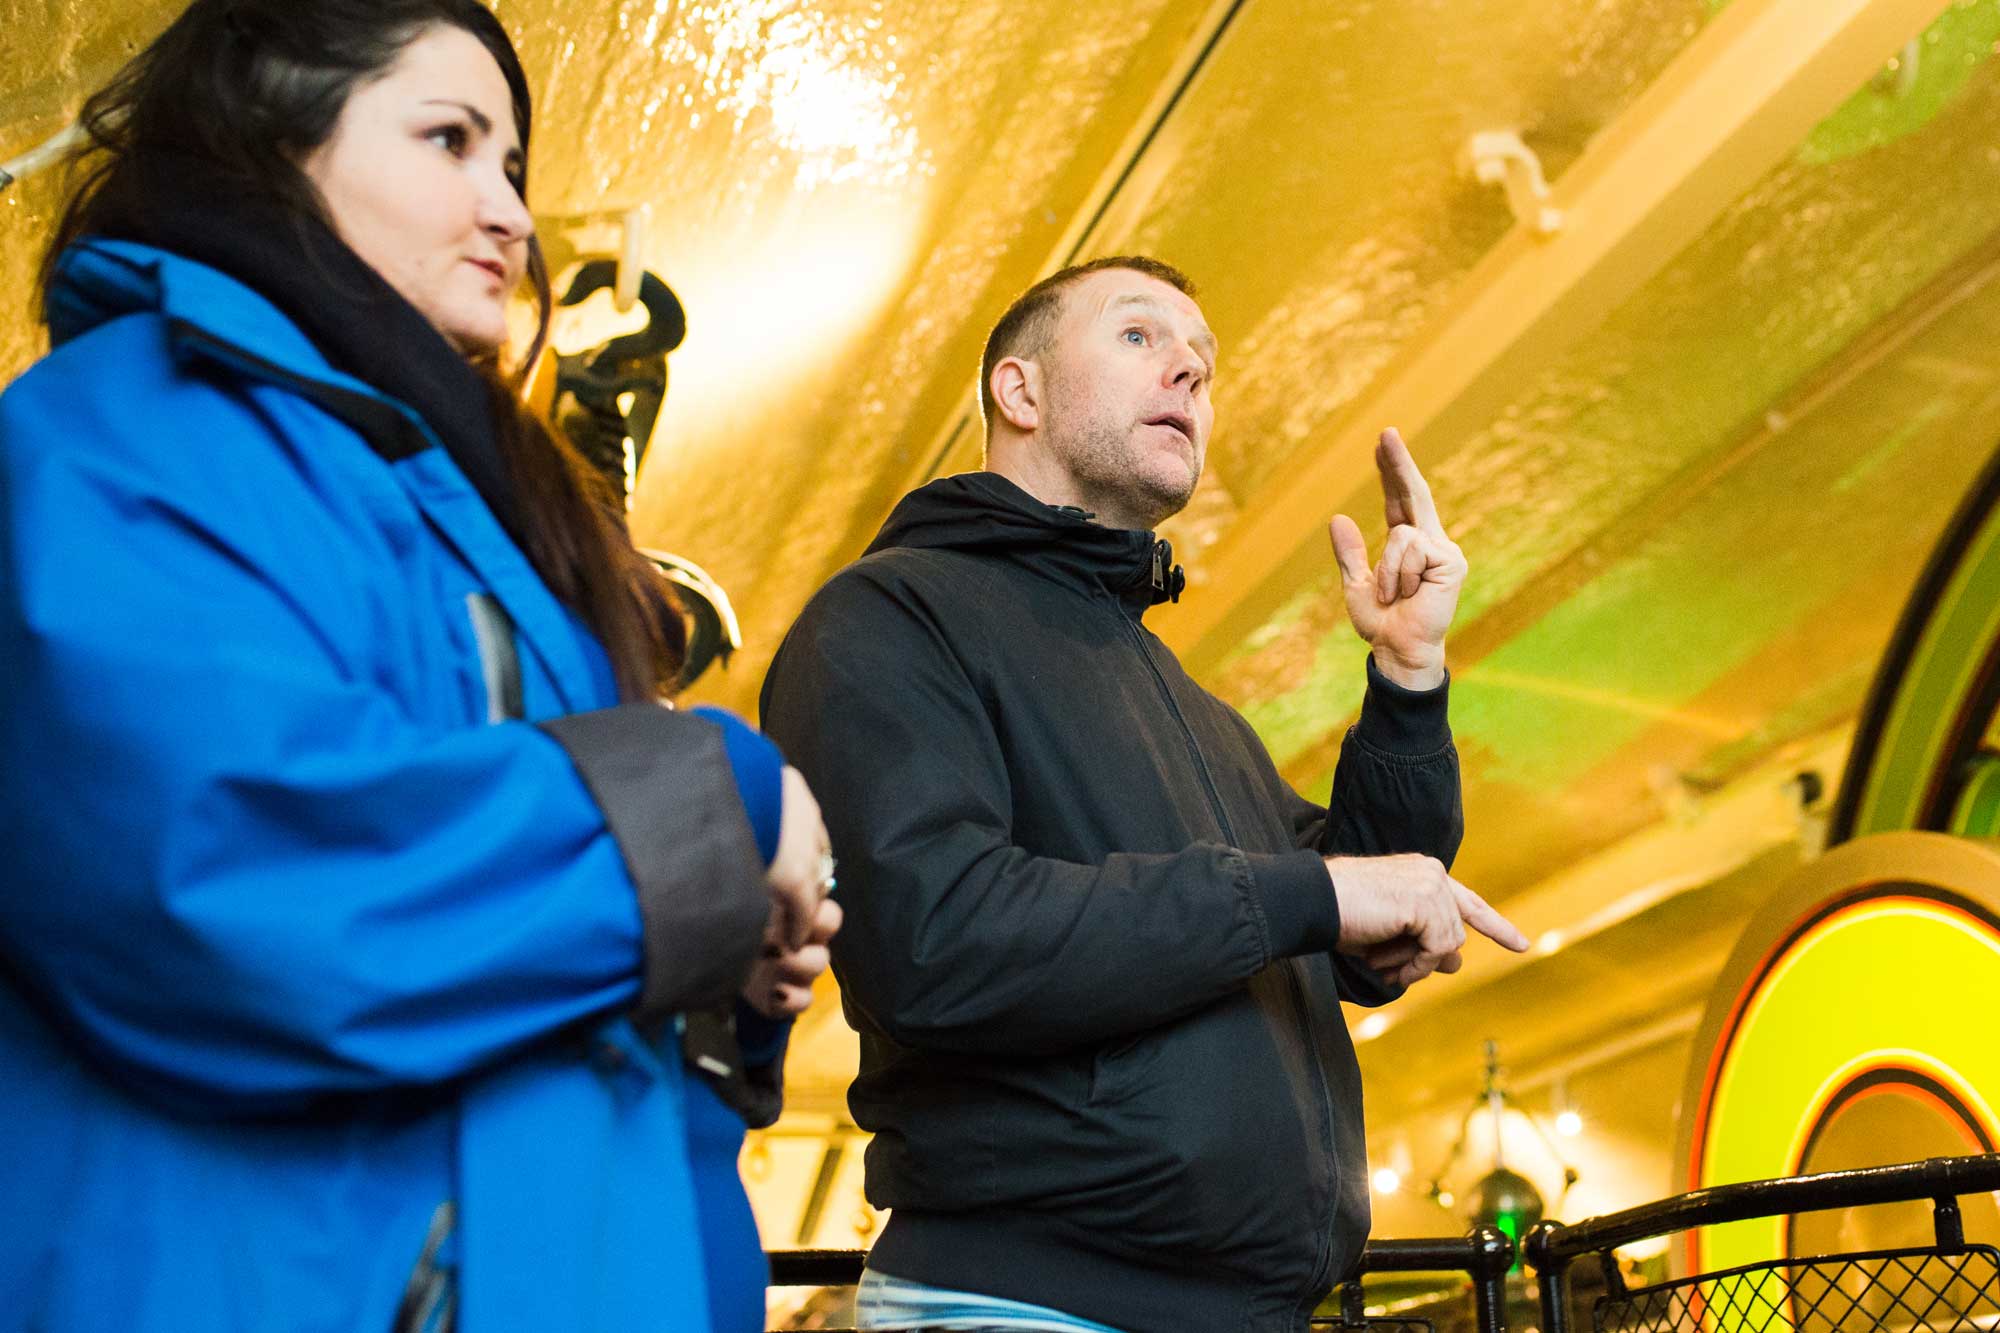 Tour guide and BSL interpreter in the Tower Bridge Engine Rooms